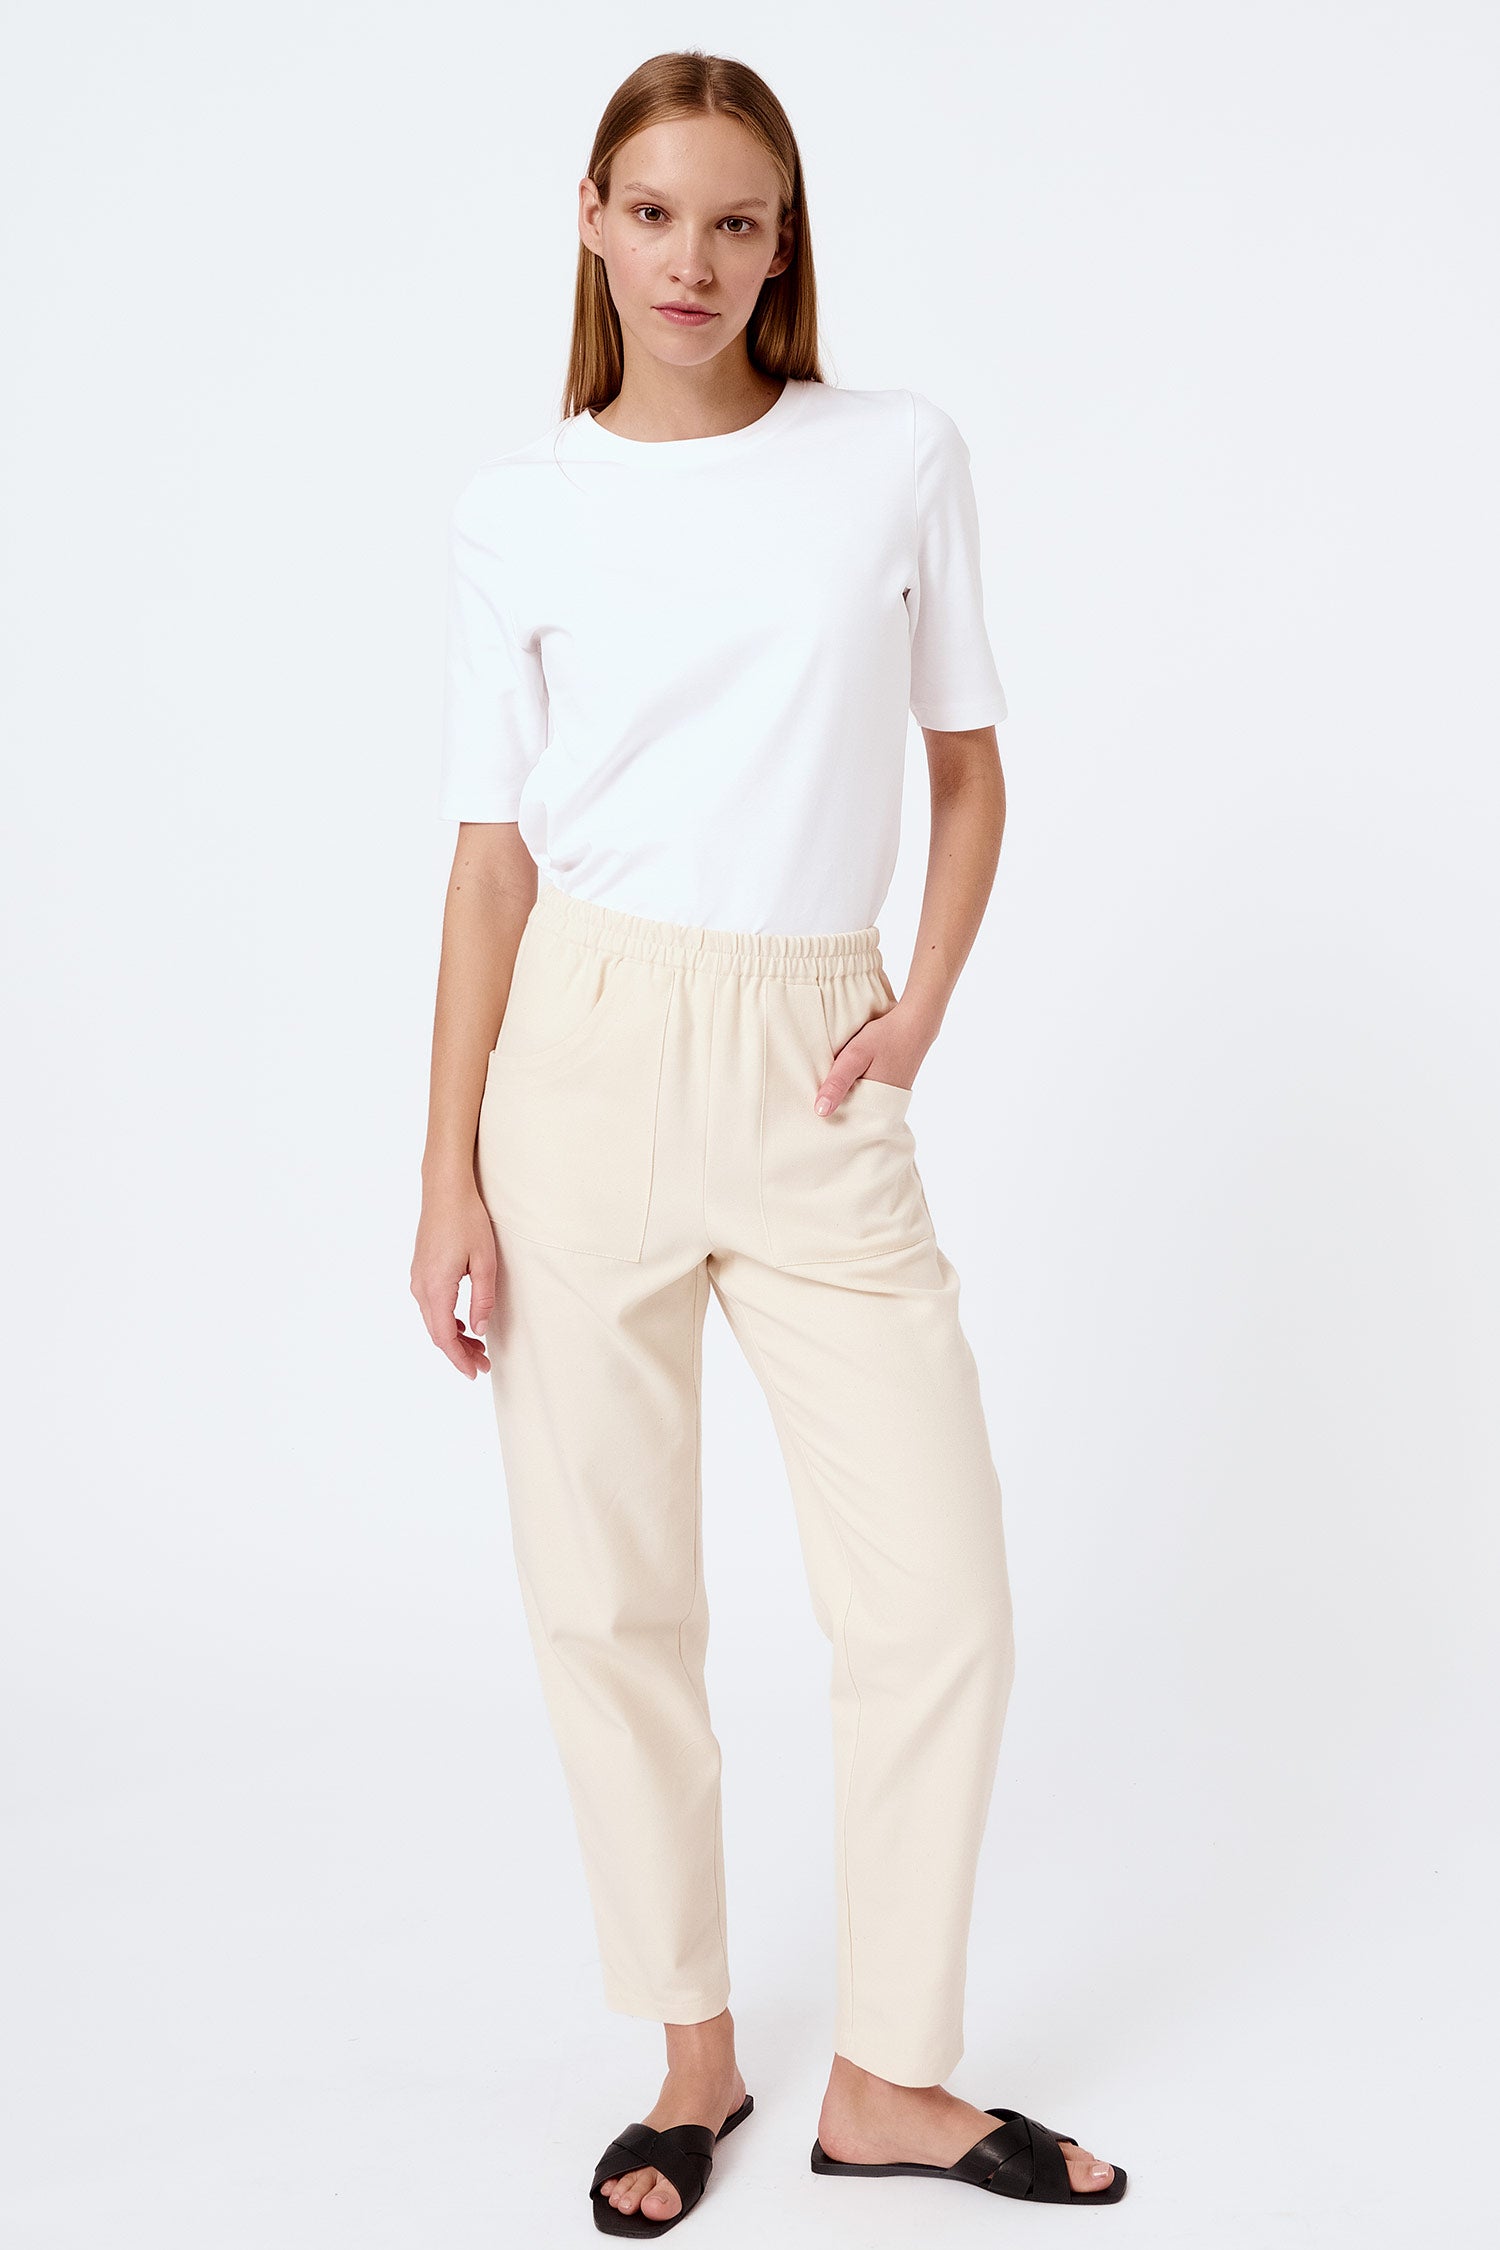 Pleated Dress Pants for Tall Women | American Tall